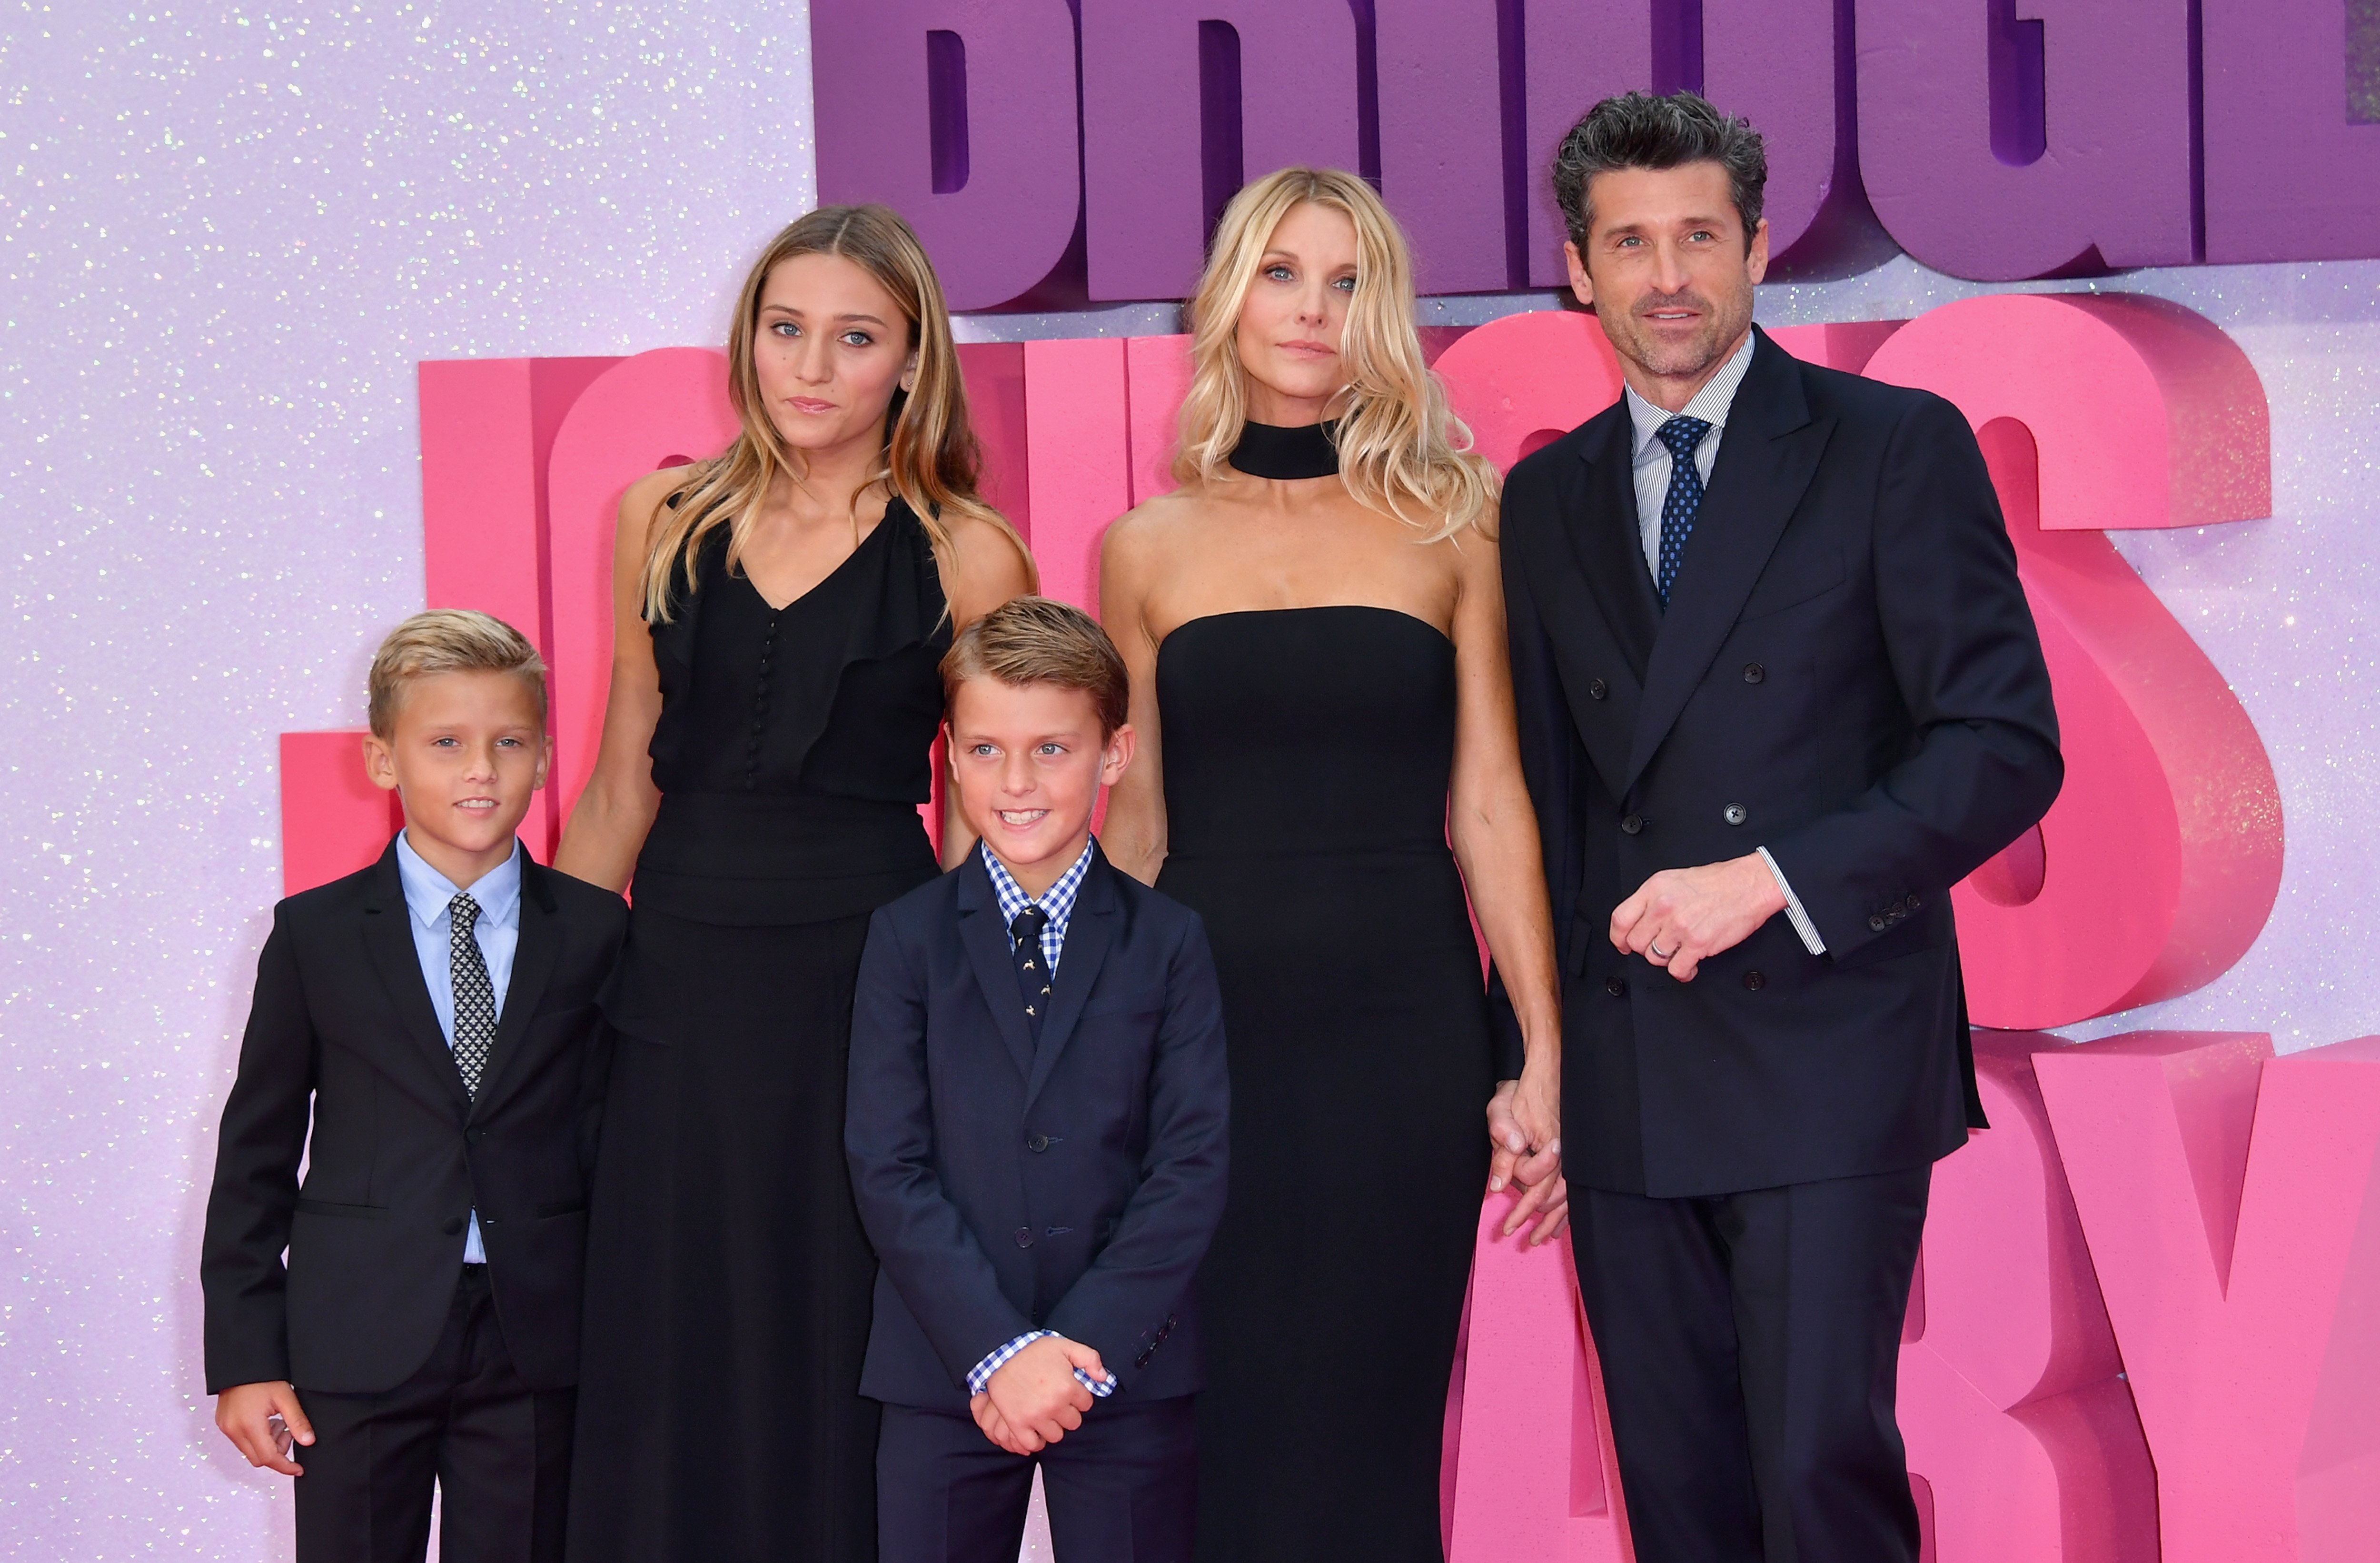 Jillian Fink, Patrick Dempsey, twin sons Darby and Sullivan, and daughter Talula, attend the "Bridget Jones's Baby" world premiere on September 5, 2016, in London, England. | Source: Getty Images